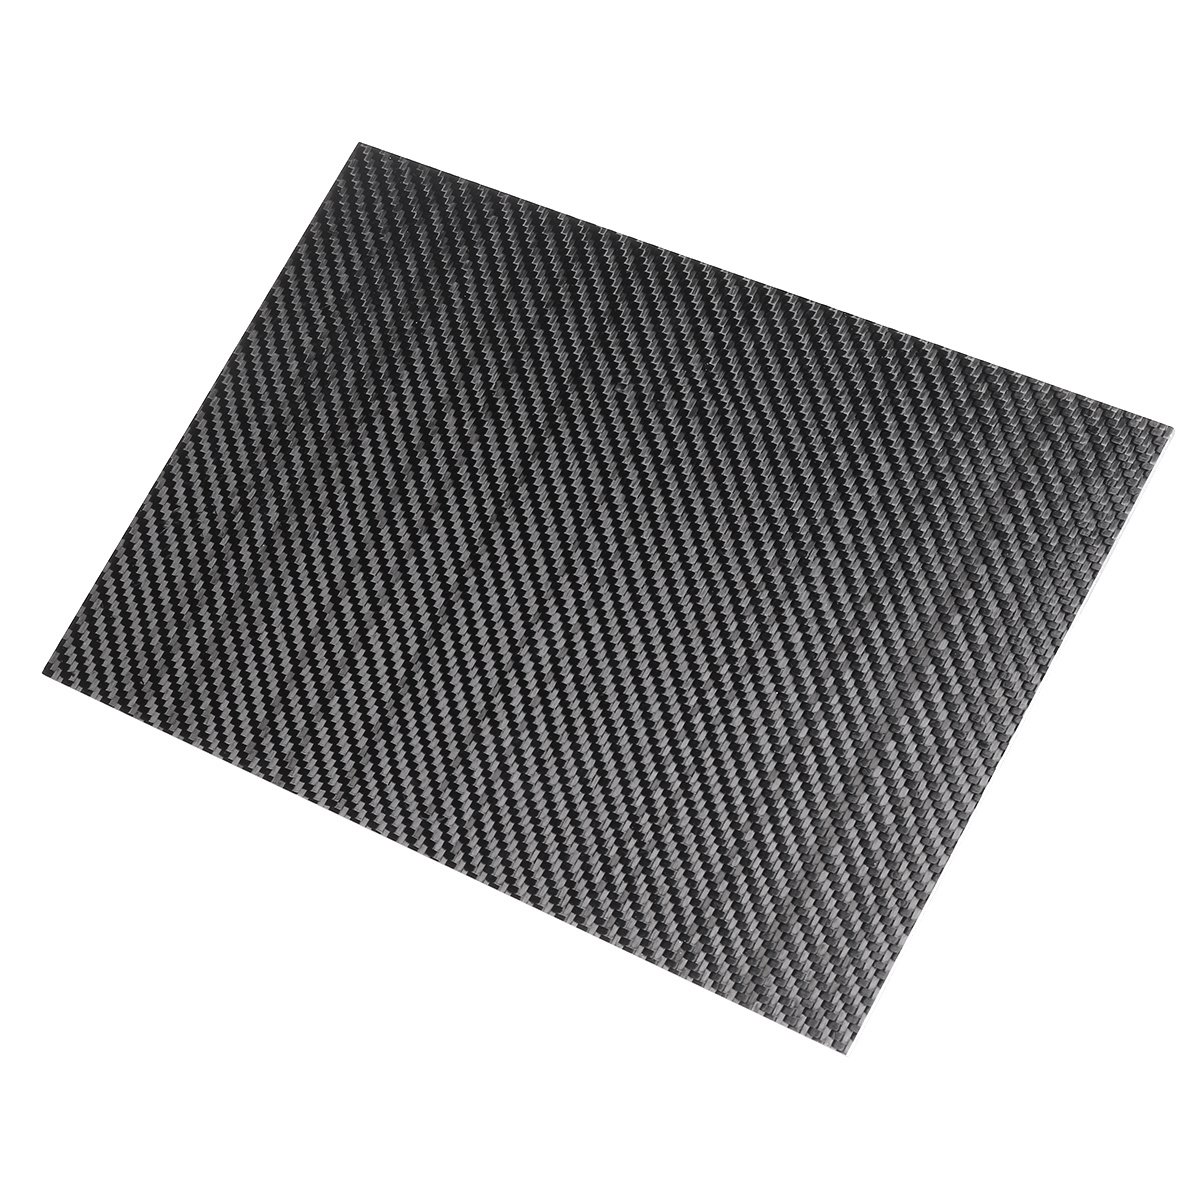 

300x500x(0.5-5)mm 3K Black Twill Weave Carbon Fiber Plate Sheet Glossy Carbon Fiber Board Panel High Composite RC Material